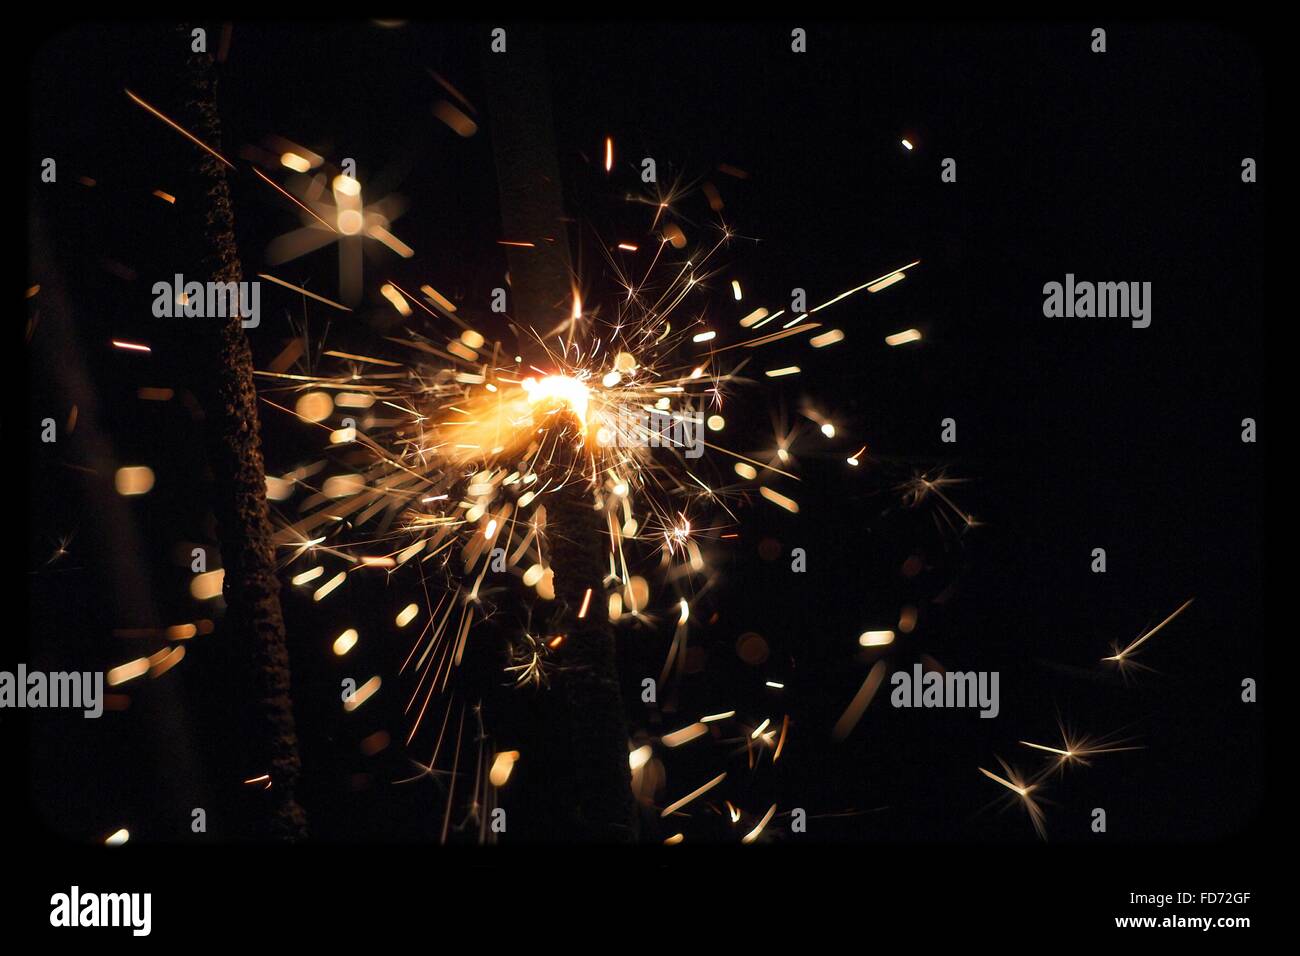 Close-Up Of Sparks At Night Stock Photo